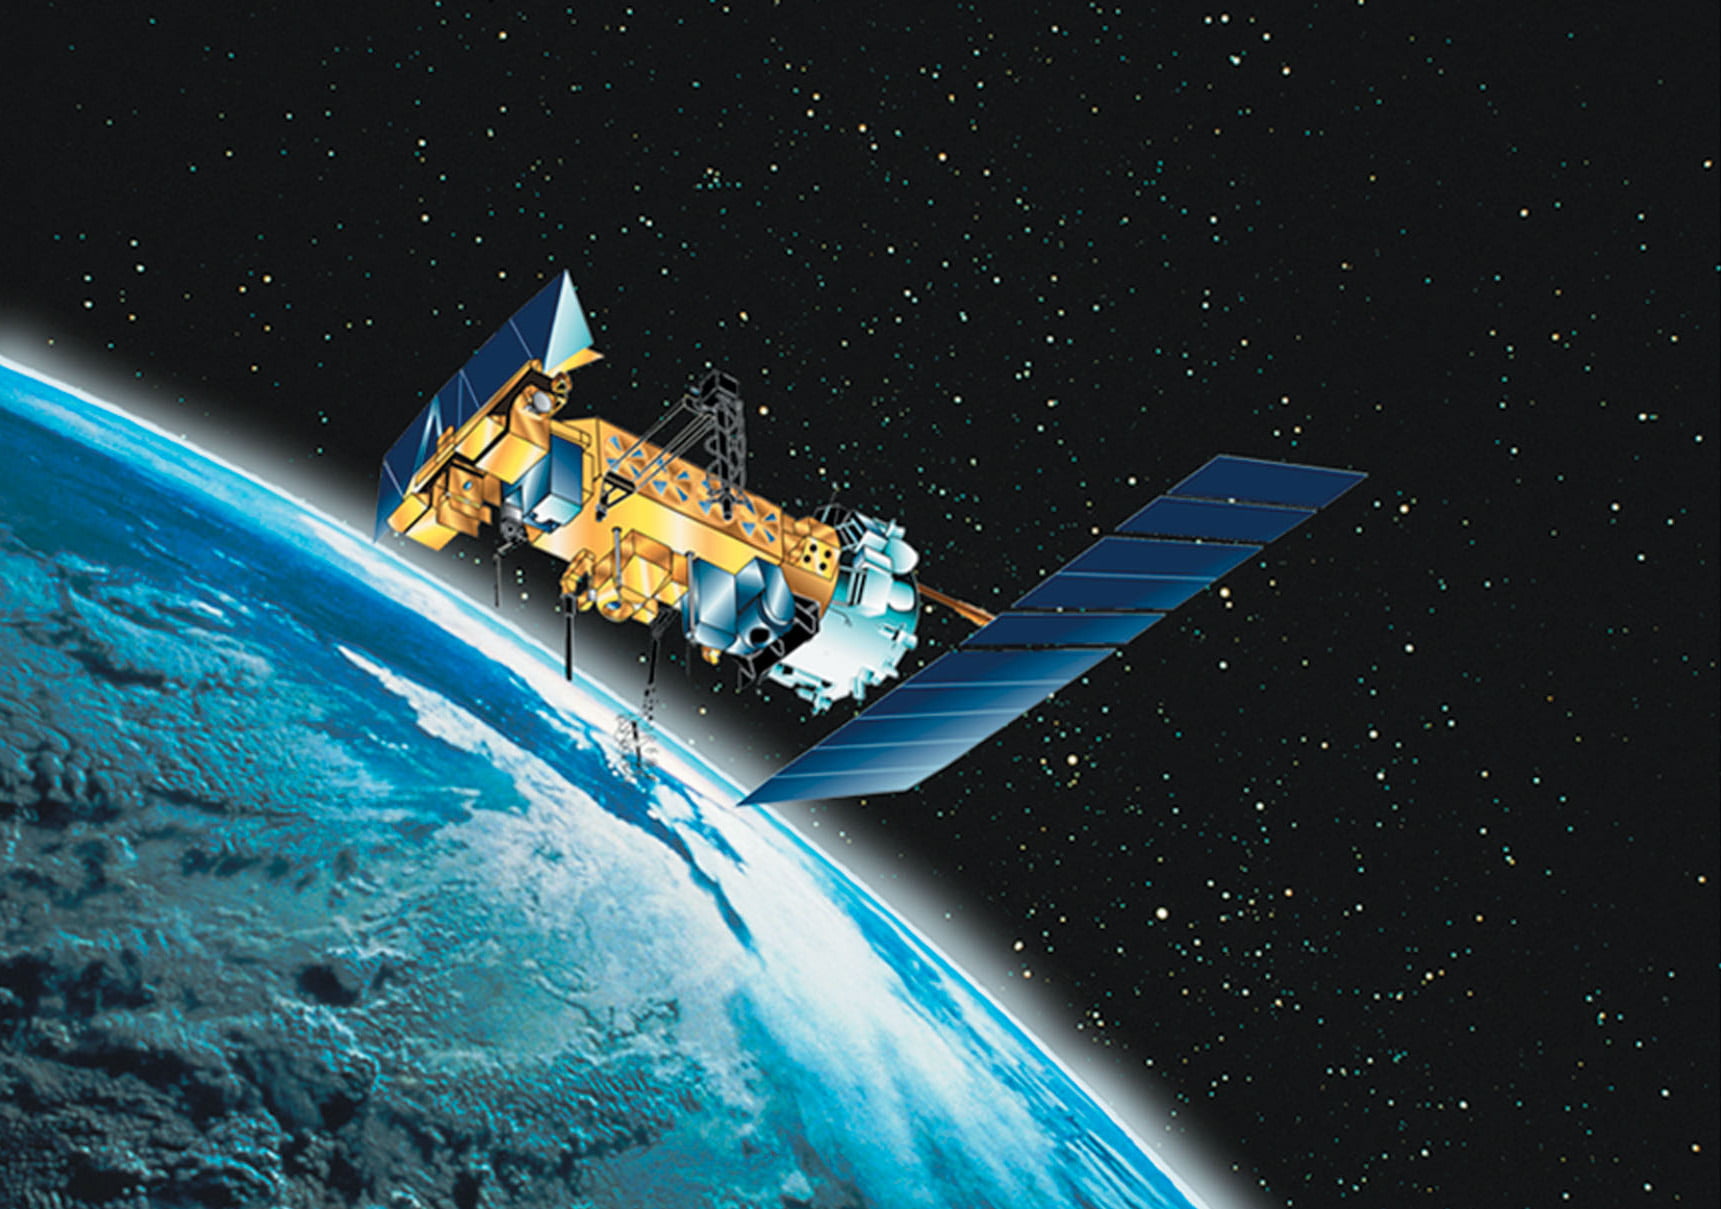 names of artificial satellites launched by India